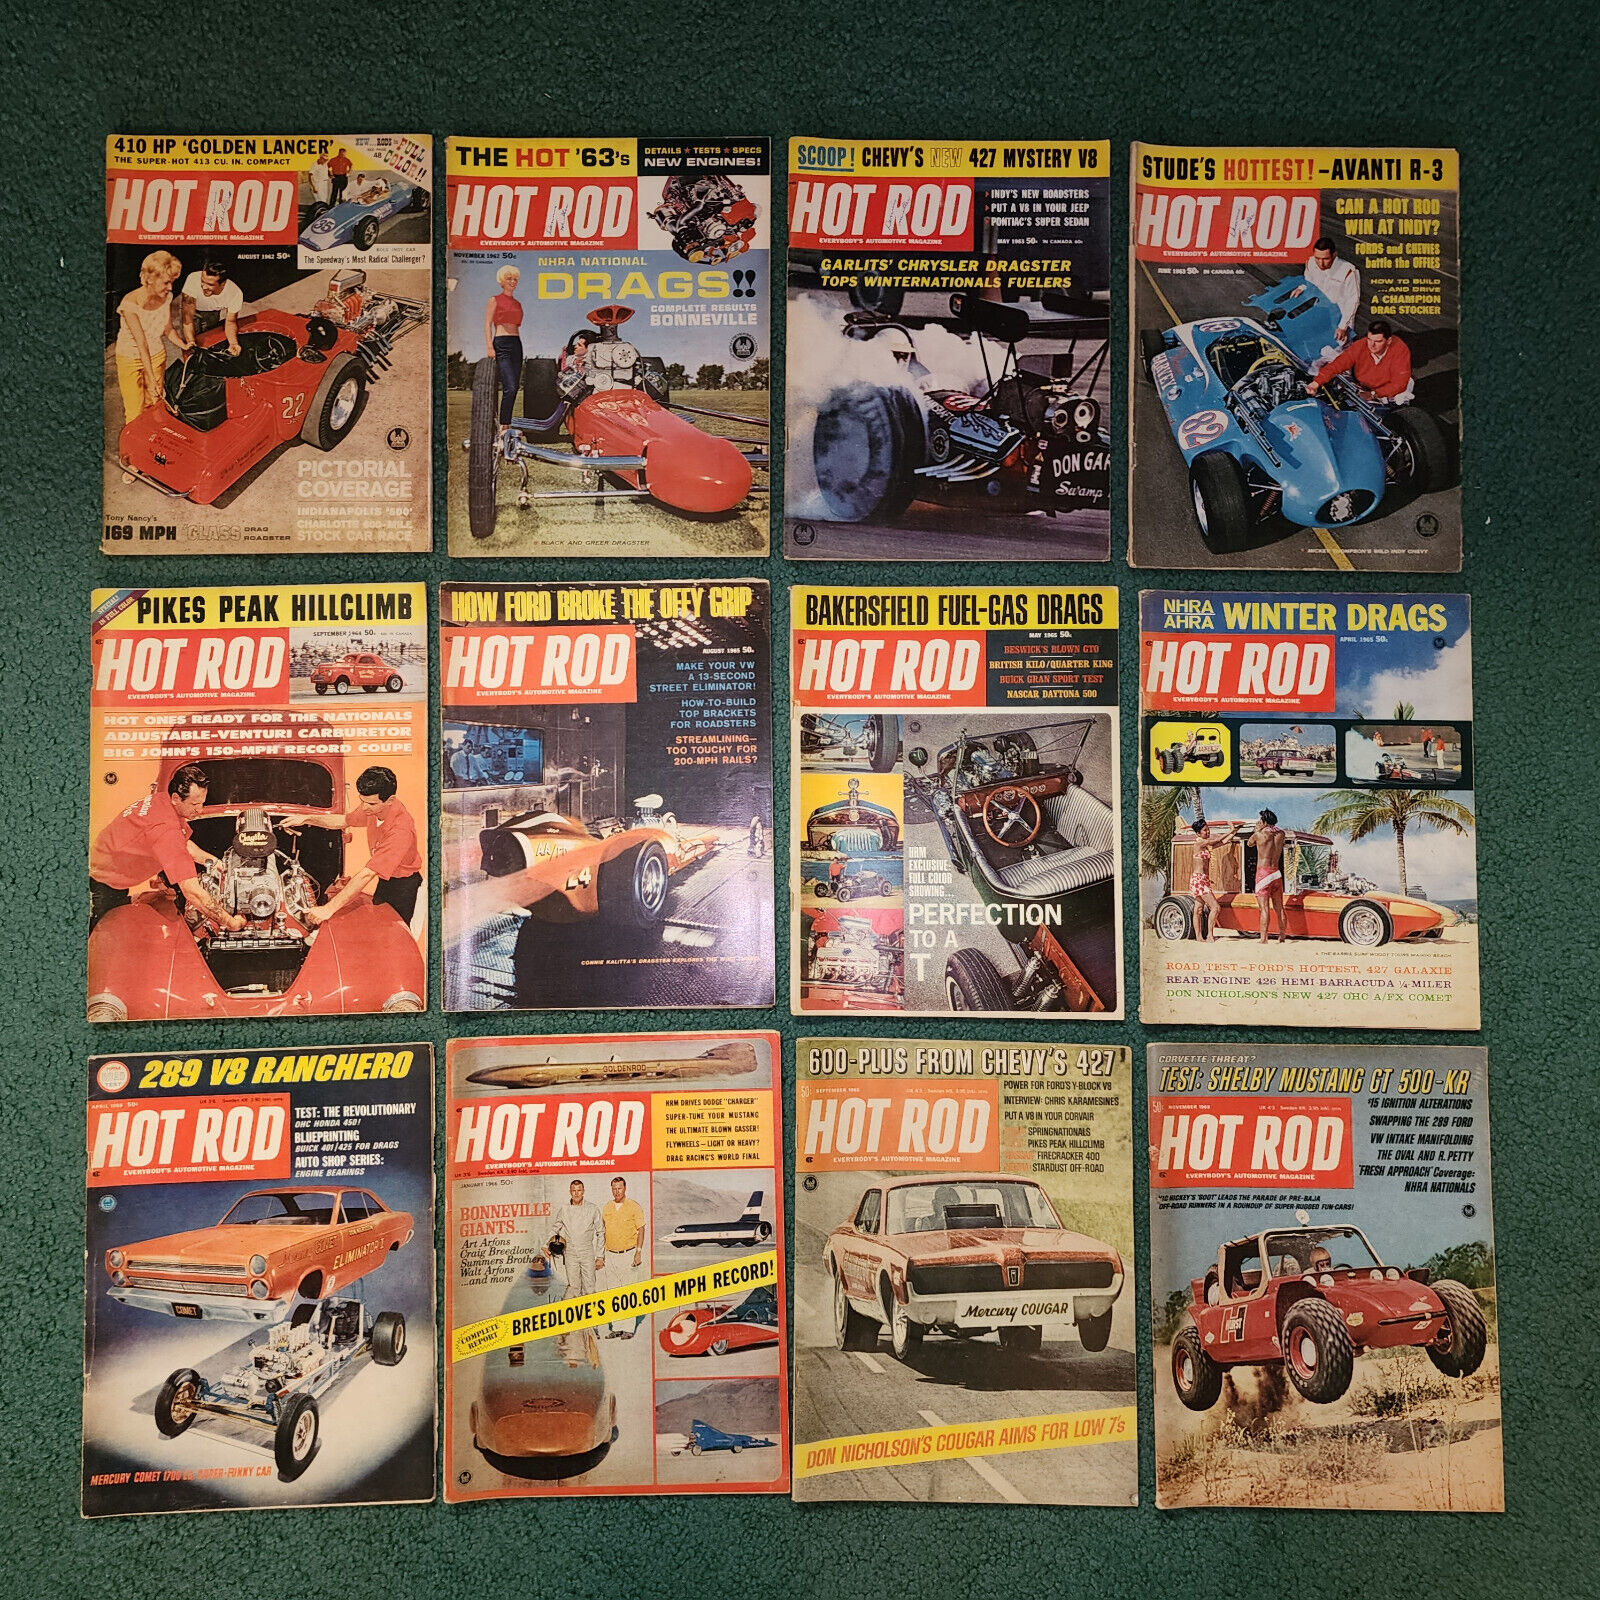 LOT OF 12 VINTAGE HOT ROD MAGAZINES magazine from the 60's 1960